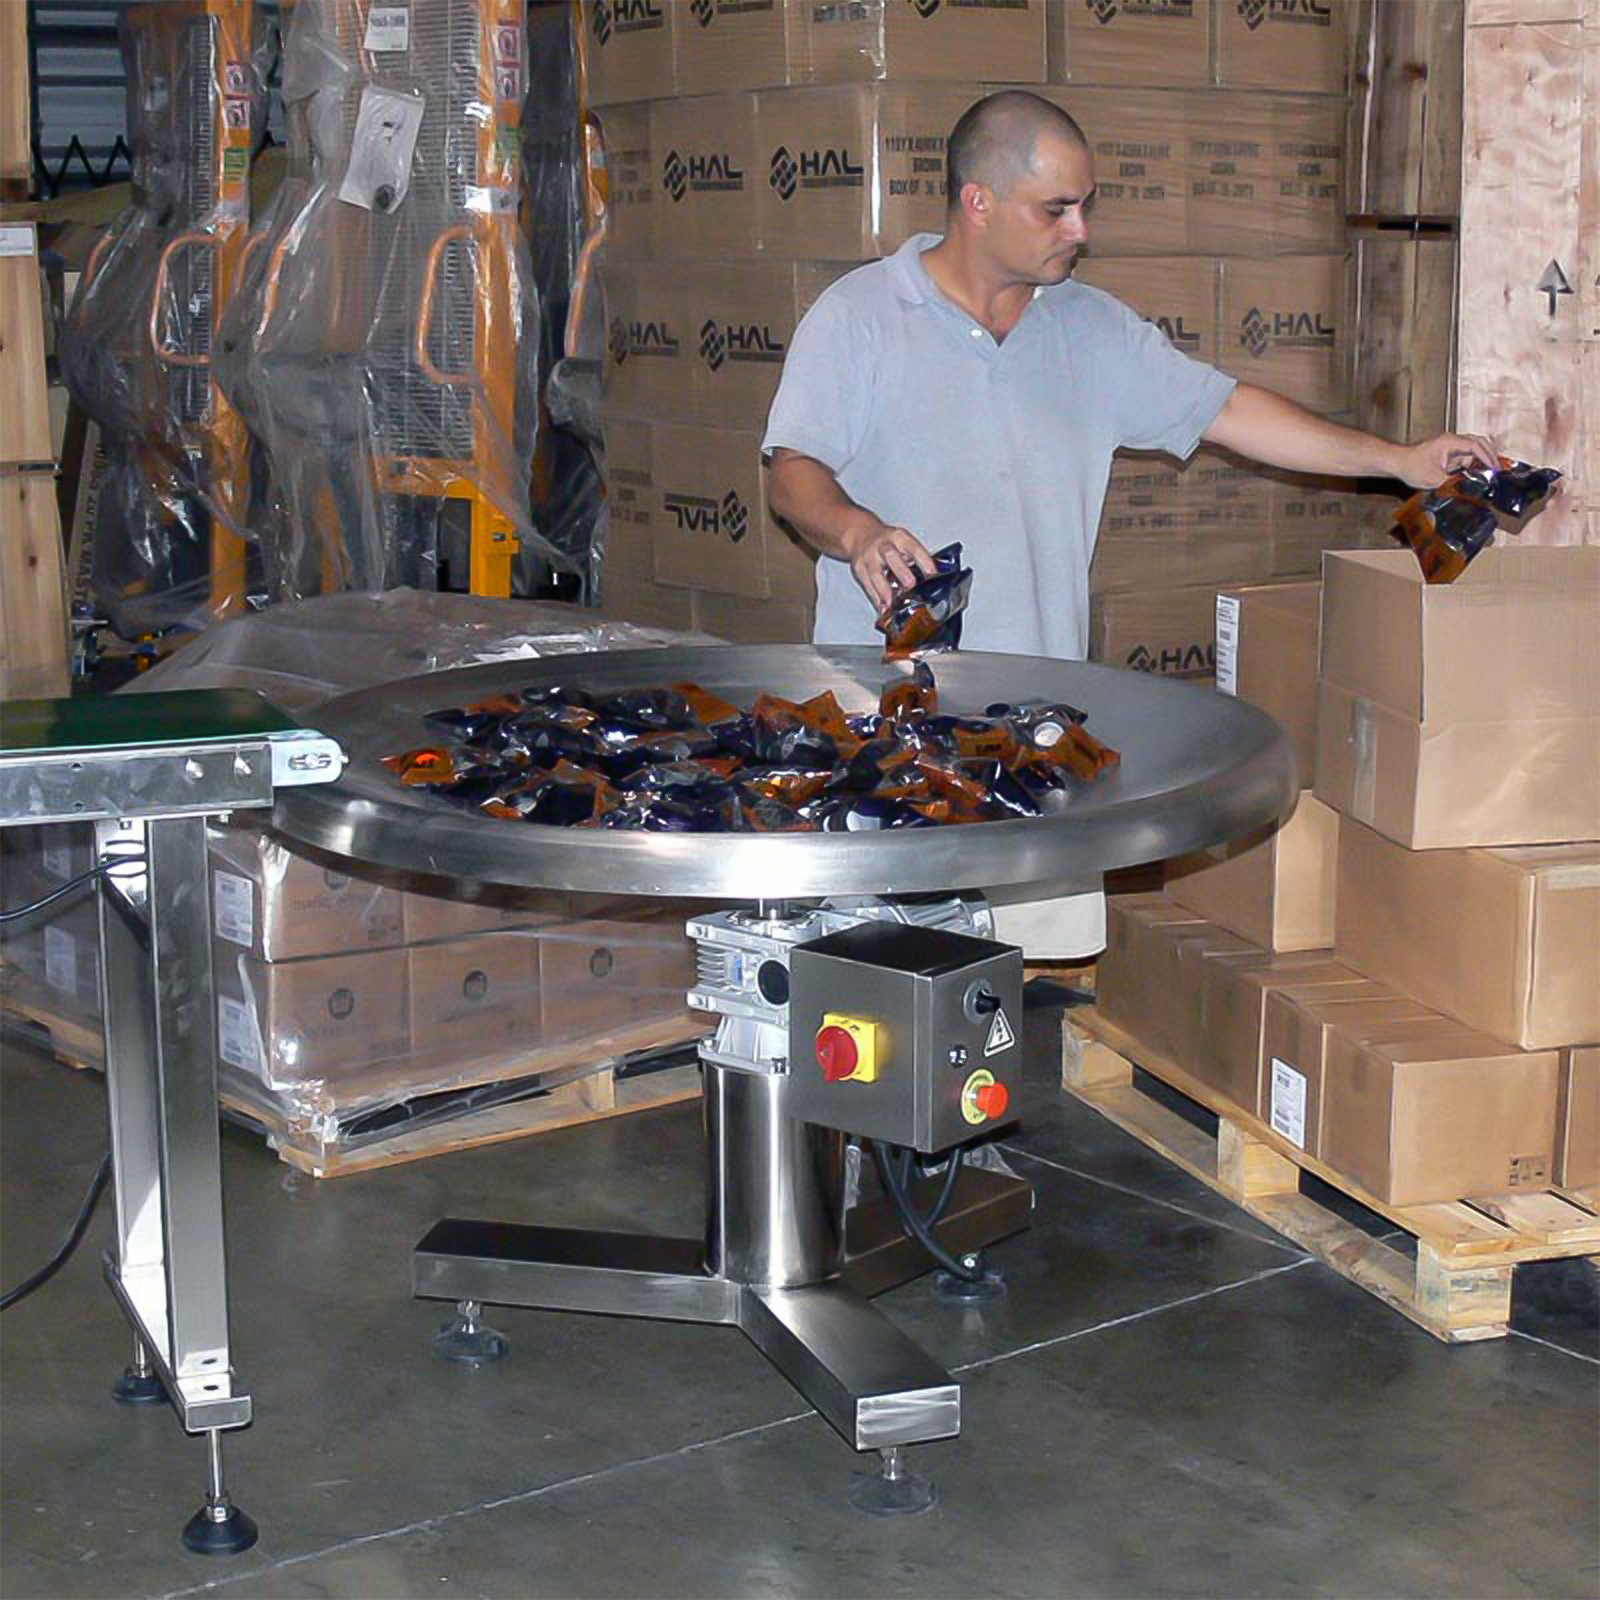 man wearing grey shirt moving packages from an accumulating rotary table into a box for distribution.